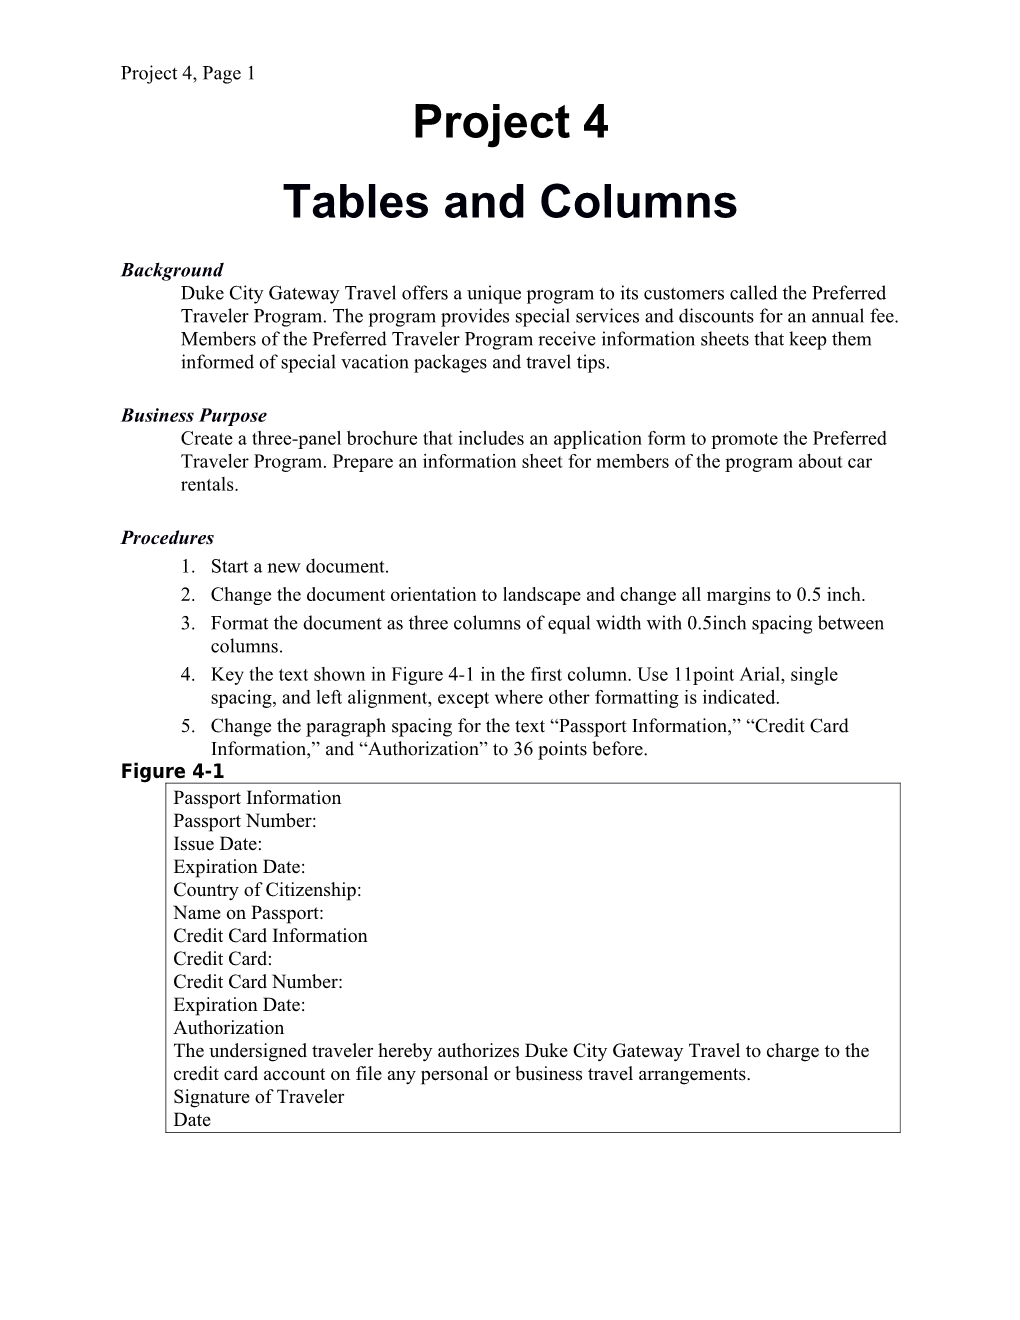 Tables Andcolumns